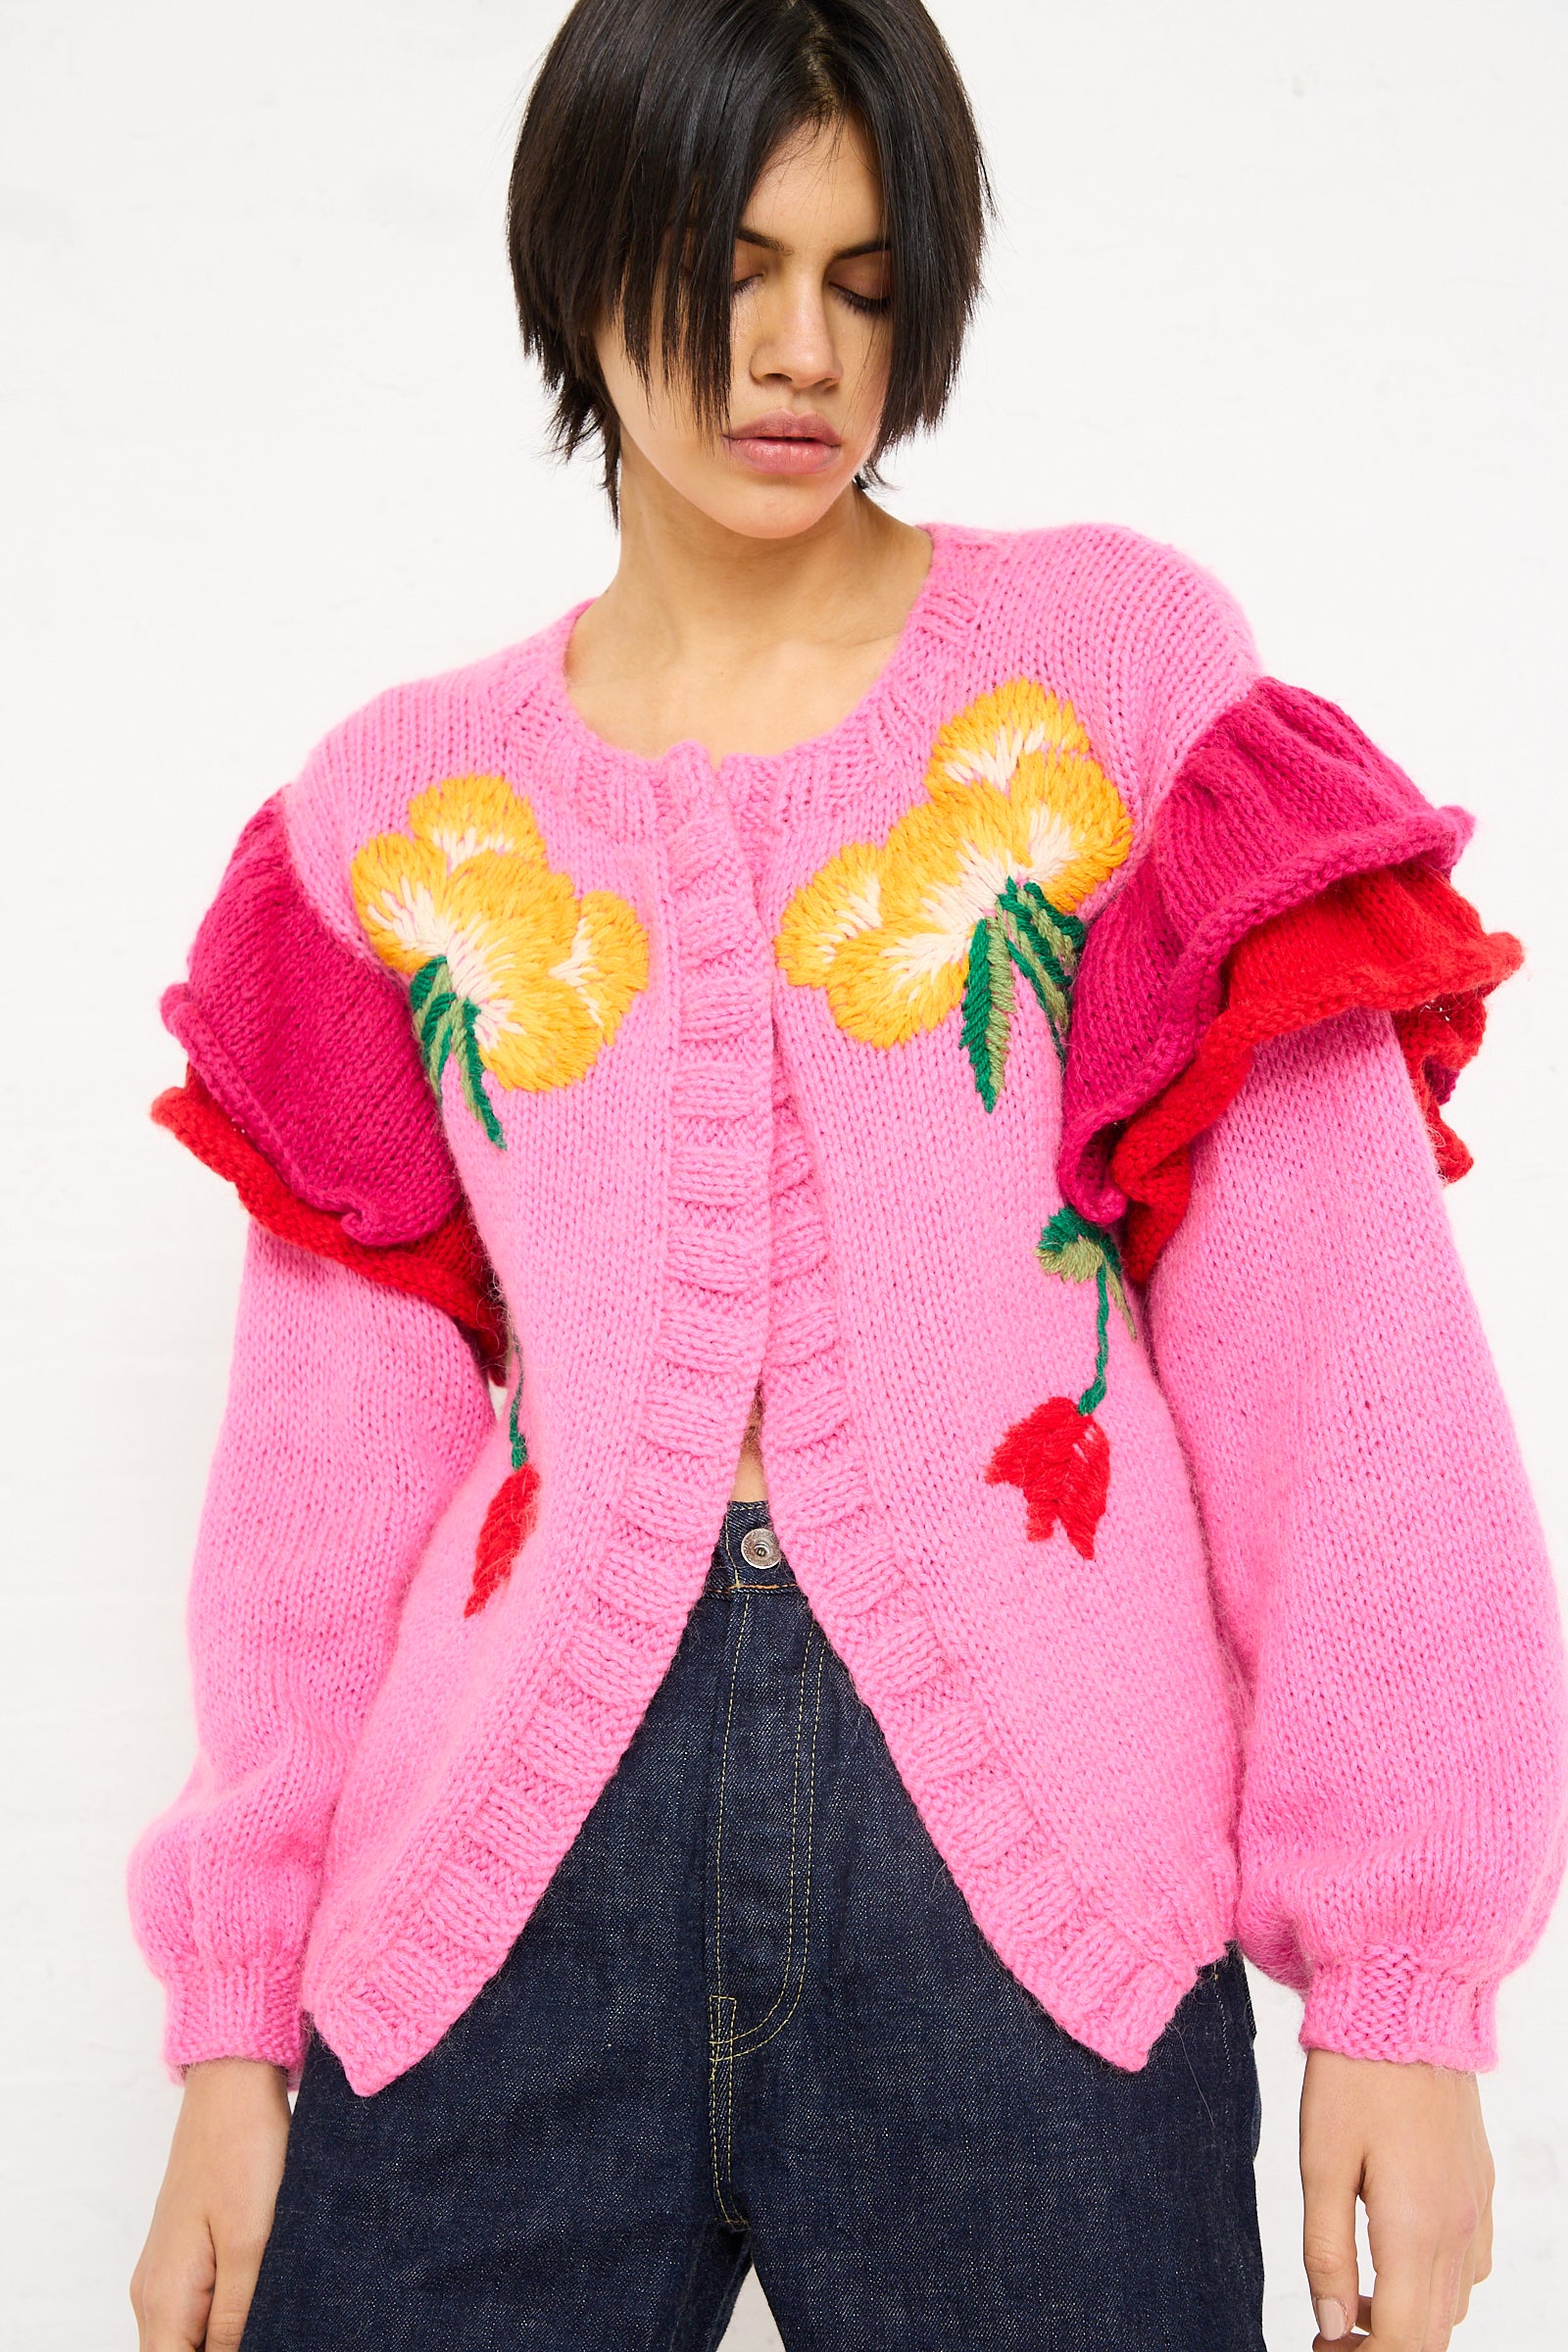 Woman in a Sofio Gongli pink, hand-knit open cardigan with large yellow floral embroidery and voluminous sleeves, designed by a Georgian knitwear designer, standing against a white background.